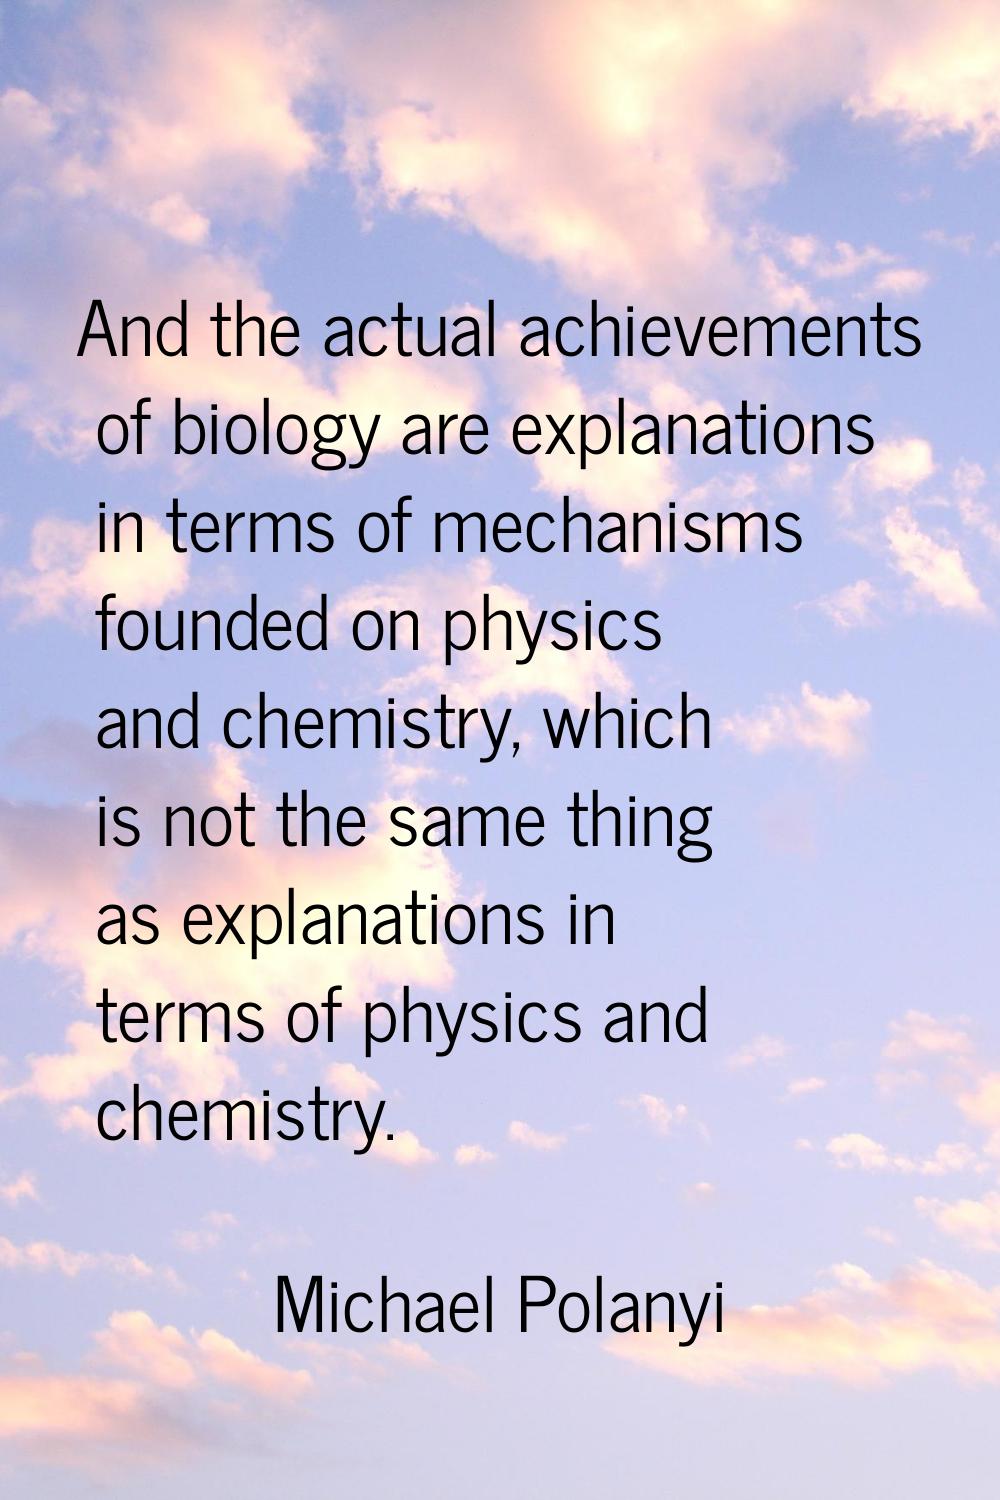 And the actual achievements of biology are explanations in terms of mechanisms founded on physics a